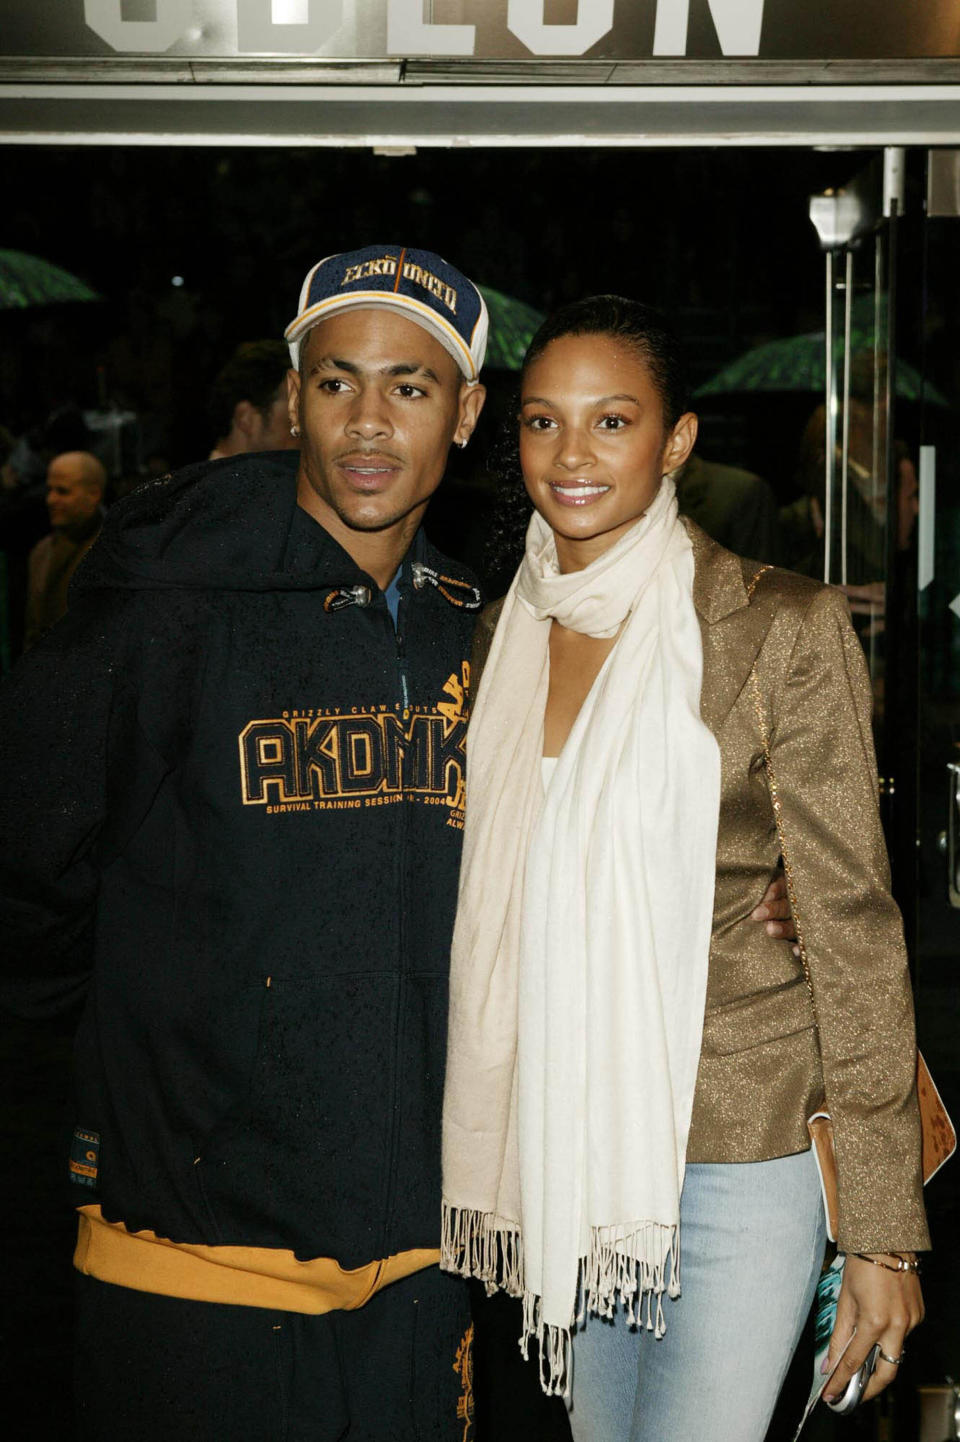 LONDON - MAY 21: British pop stars Harvey and Aleesha Dixon attend premiere of 'The Matrix - Reloaded' at the Odeon Leicester Square on May 21, 2003 in London. (Photo by Dave Hogan/Getty Images)